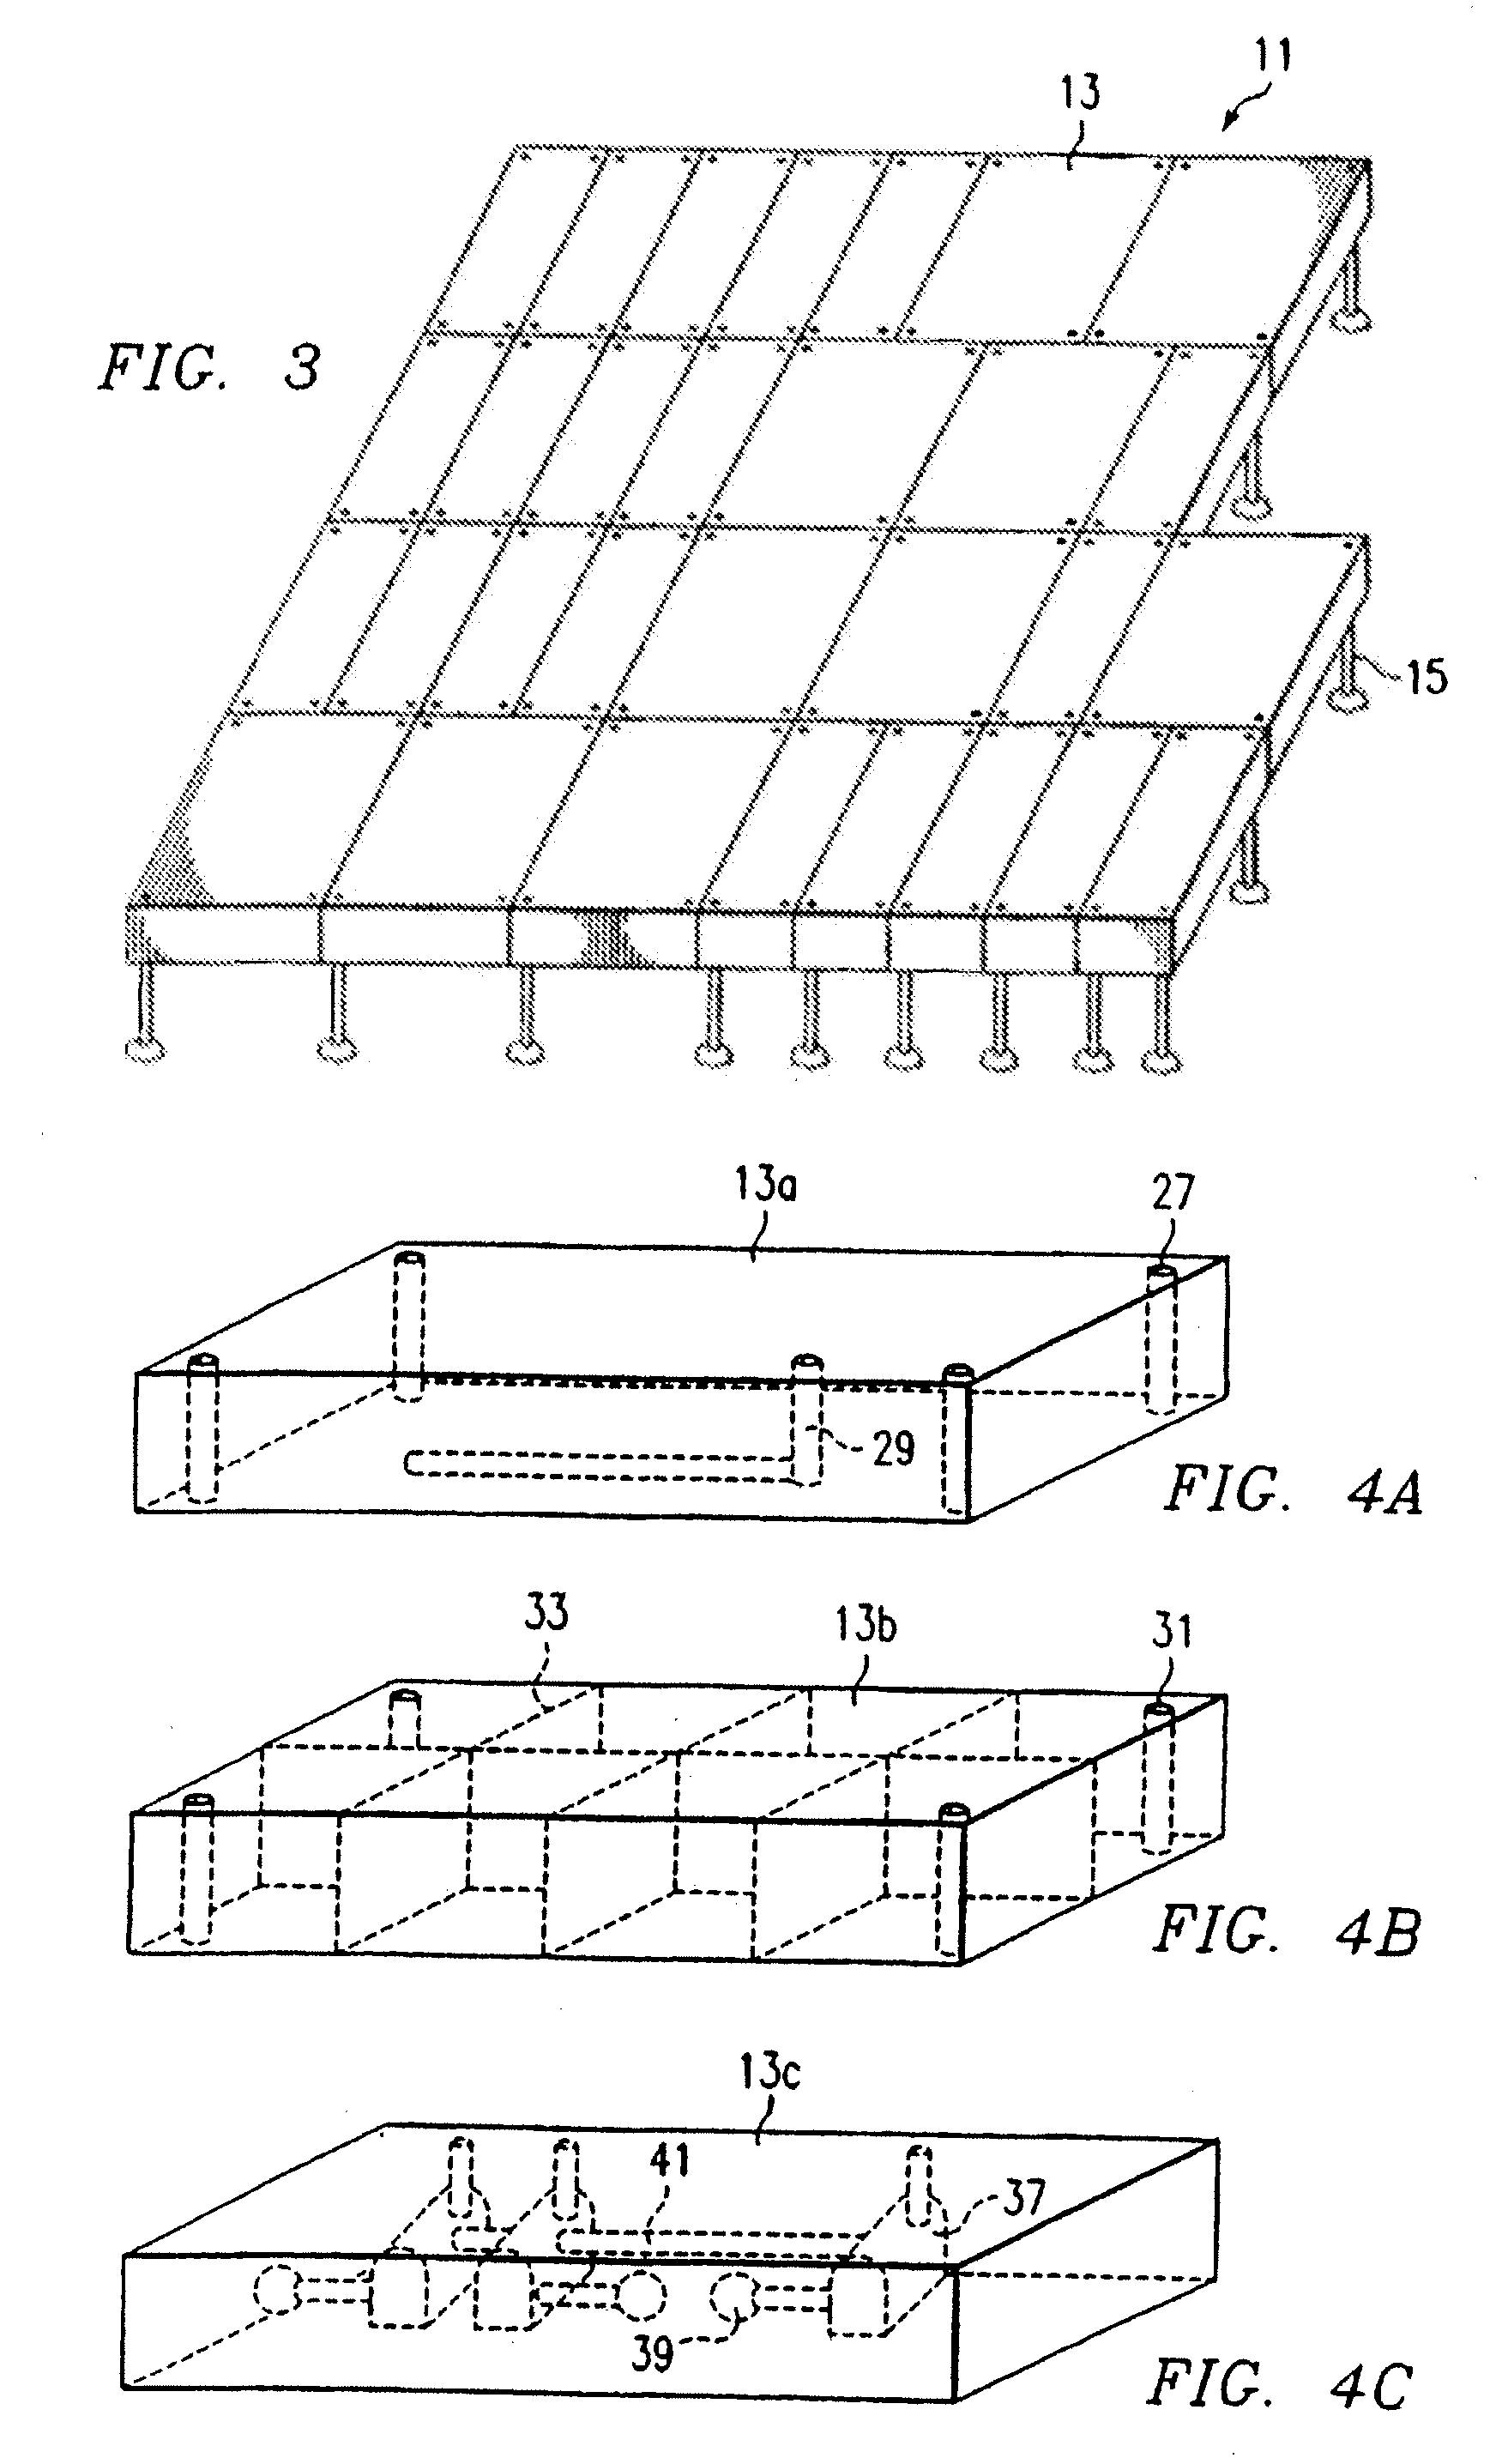 Method and System for Building Modular Structures from Which Oil and Gas Wells are Drilled